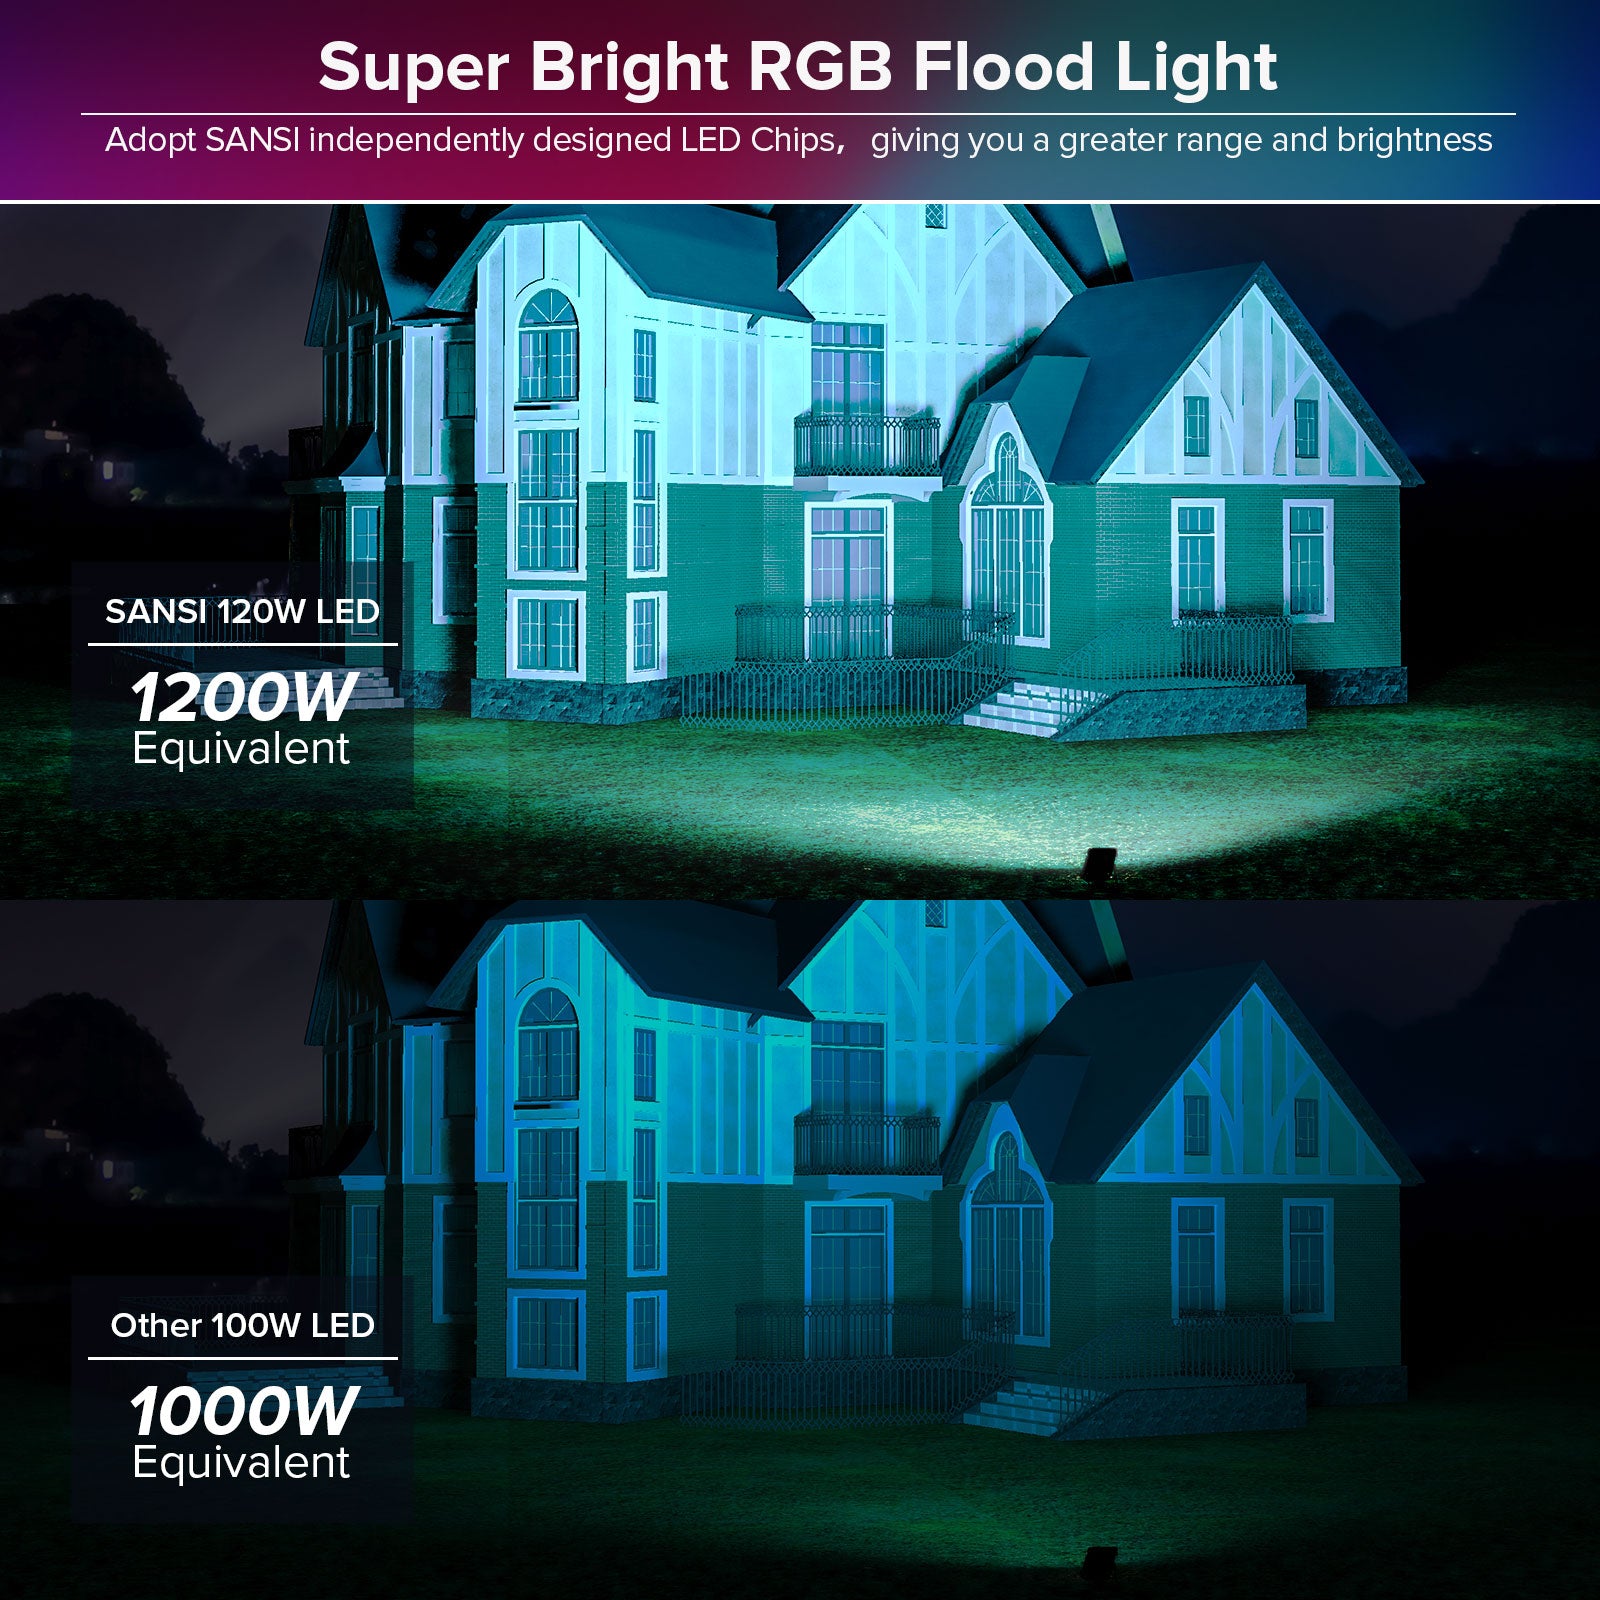 120W Super Bright RGB Led Flood Light，which is adopted SANSI independently designed LED Chips， giving you a greater range and brightness.